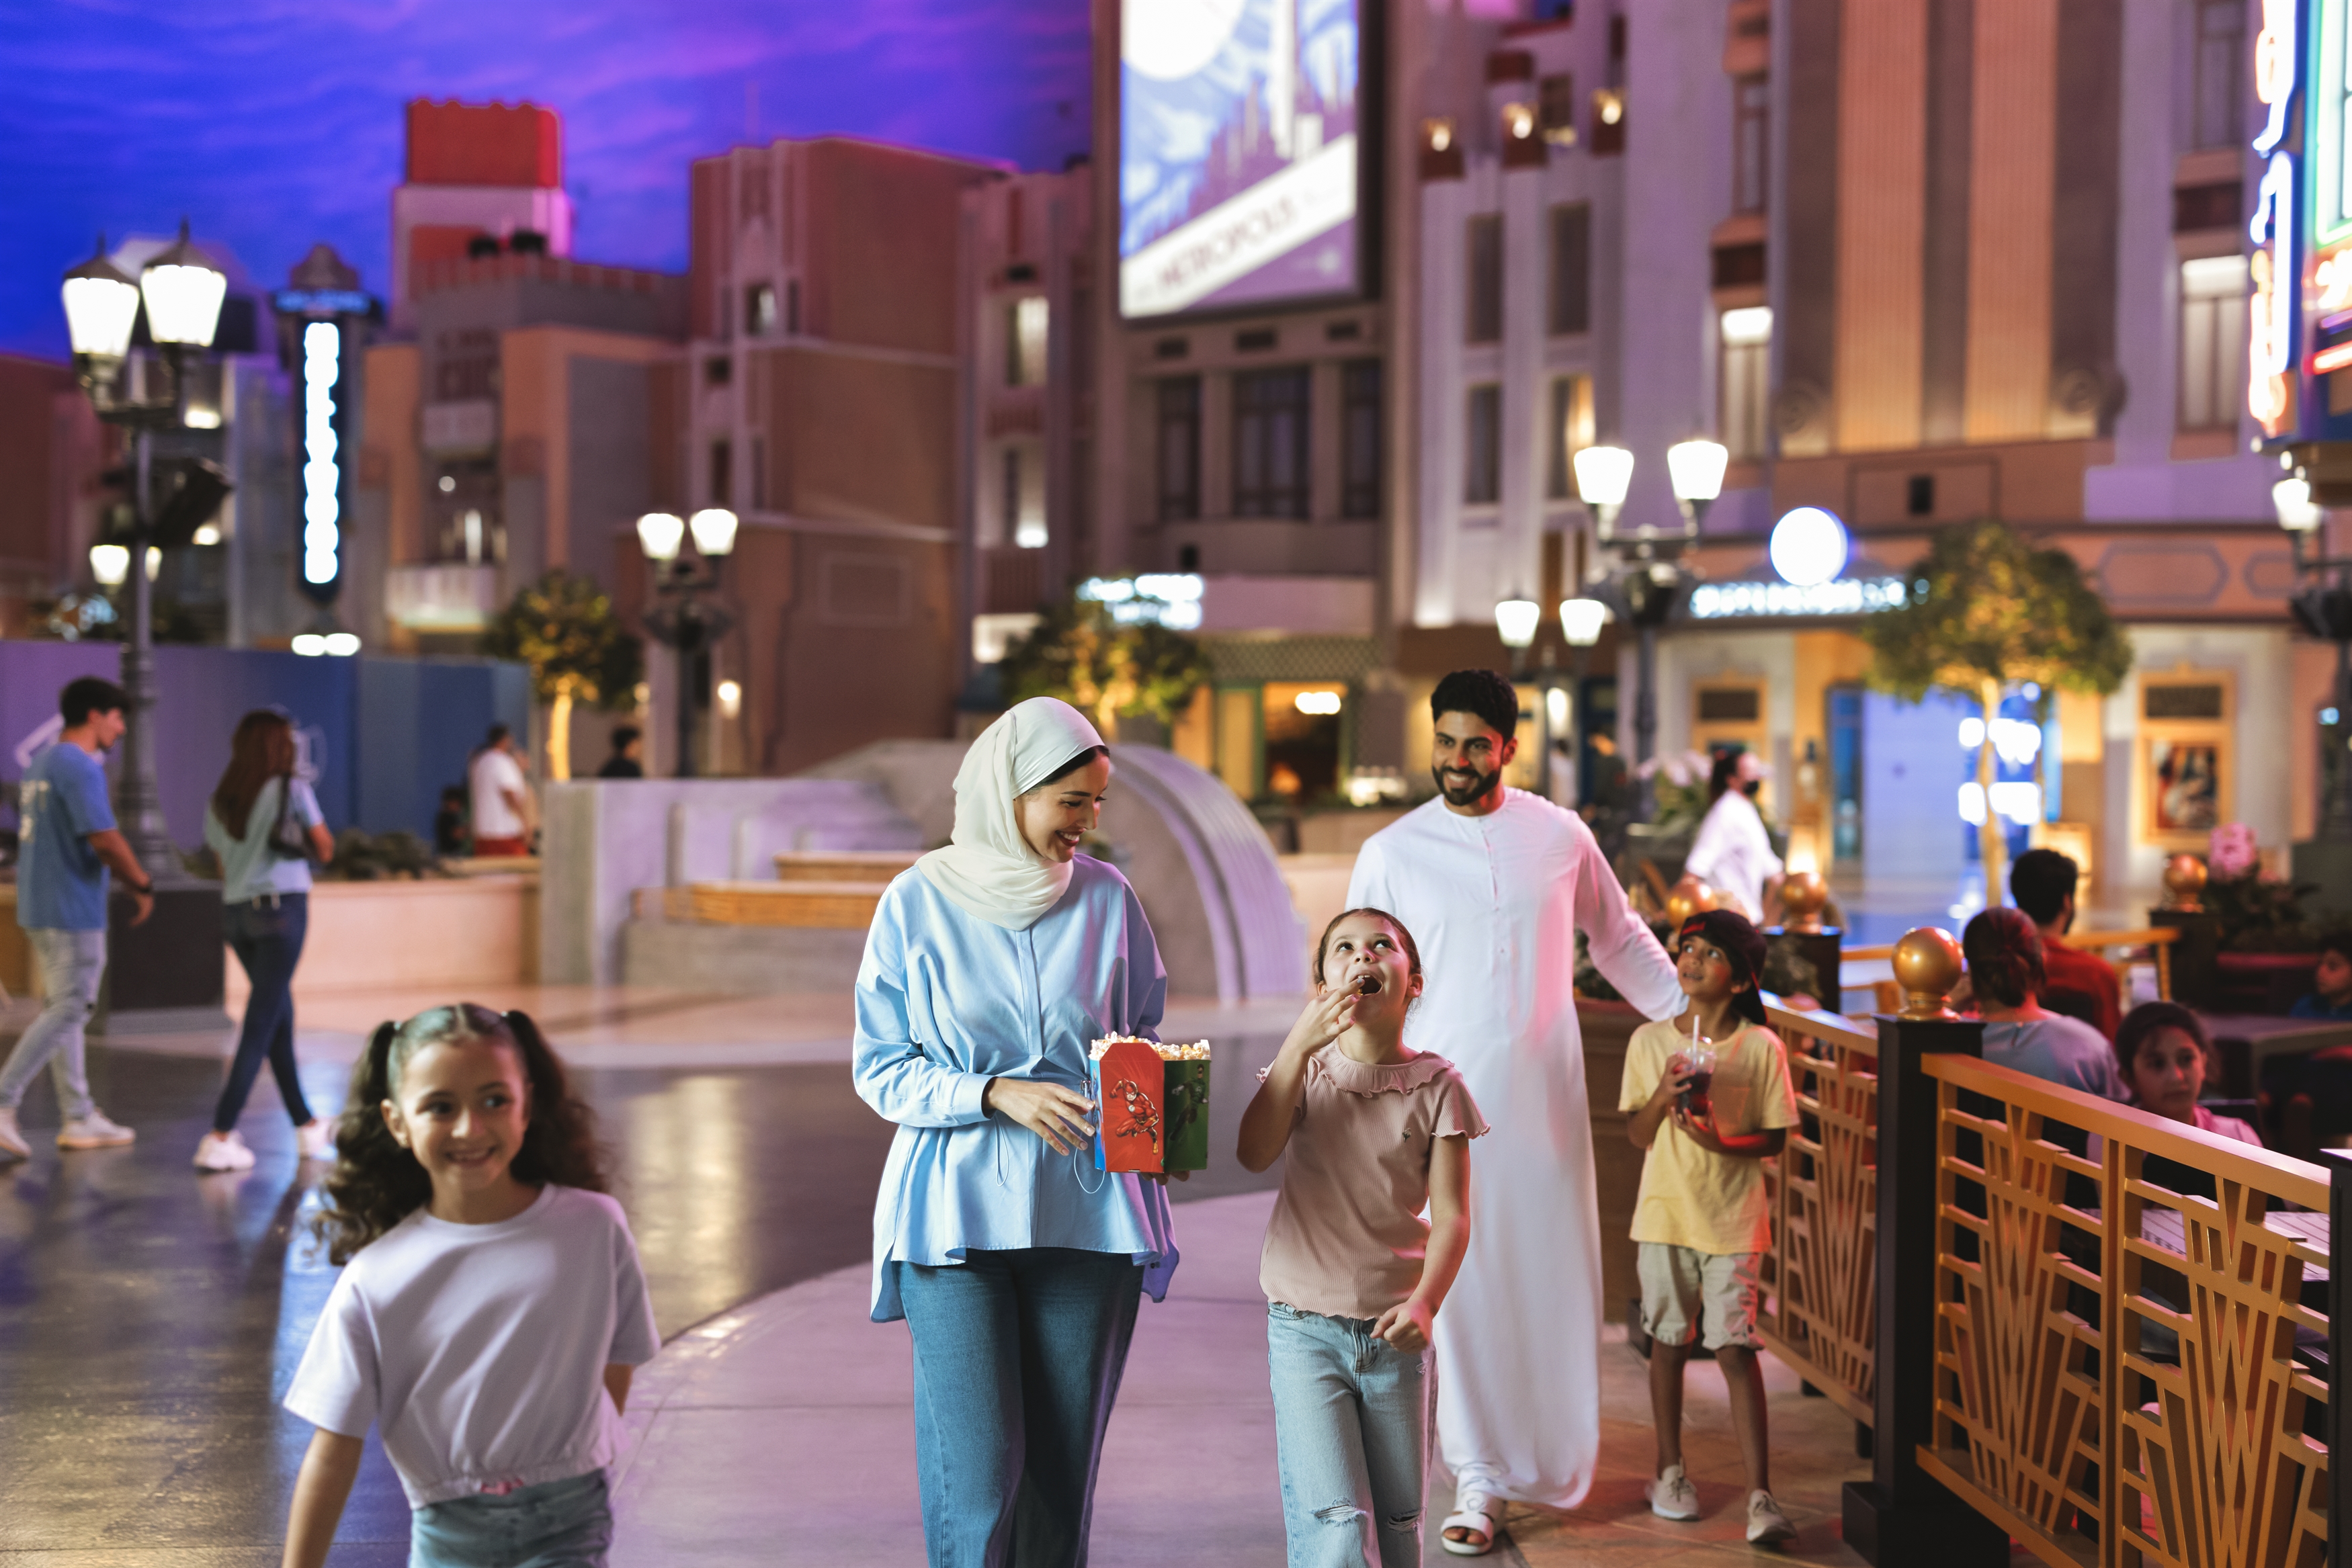 Dine with your favourite cartoon characters at The WB™ Abu Dhabi